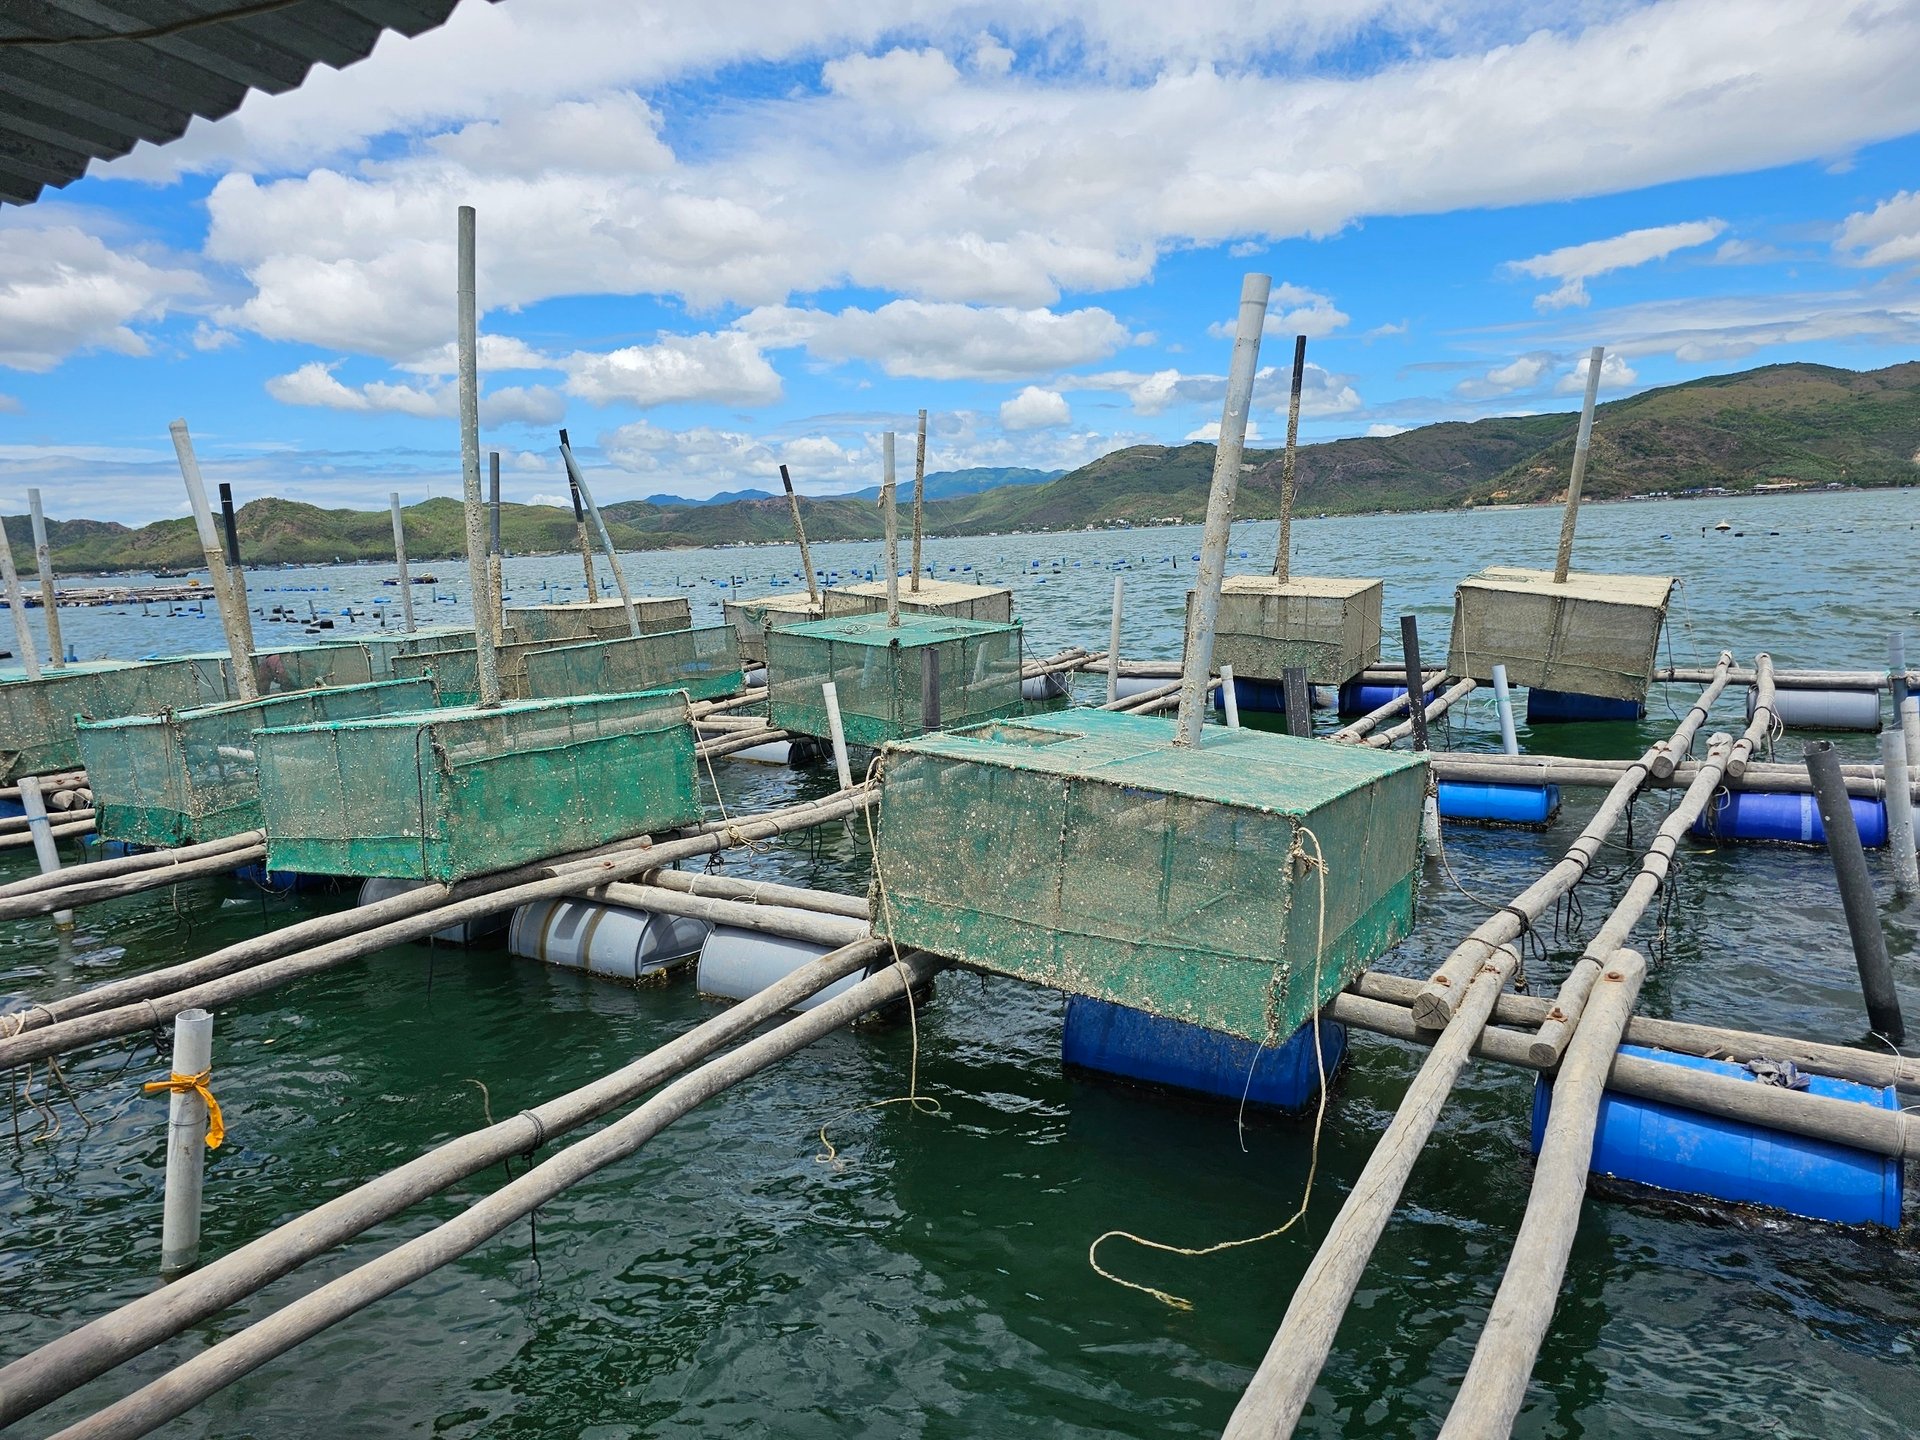 Aquaculture using cages on the sea in Phu Yen province developed quite strongly, with more than 100,000 cages on an area of ​​about 1,500 hectares of water surface.